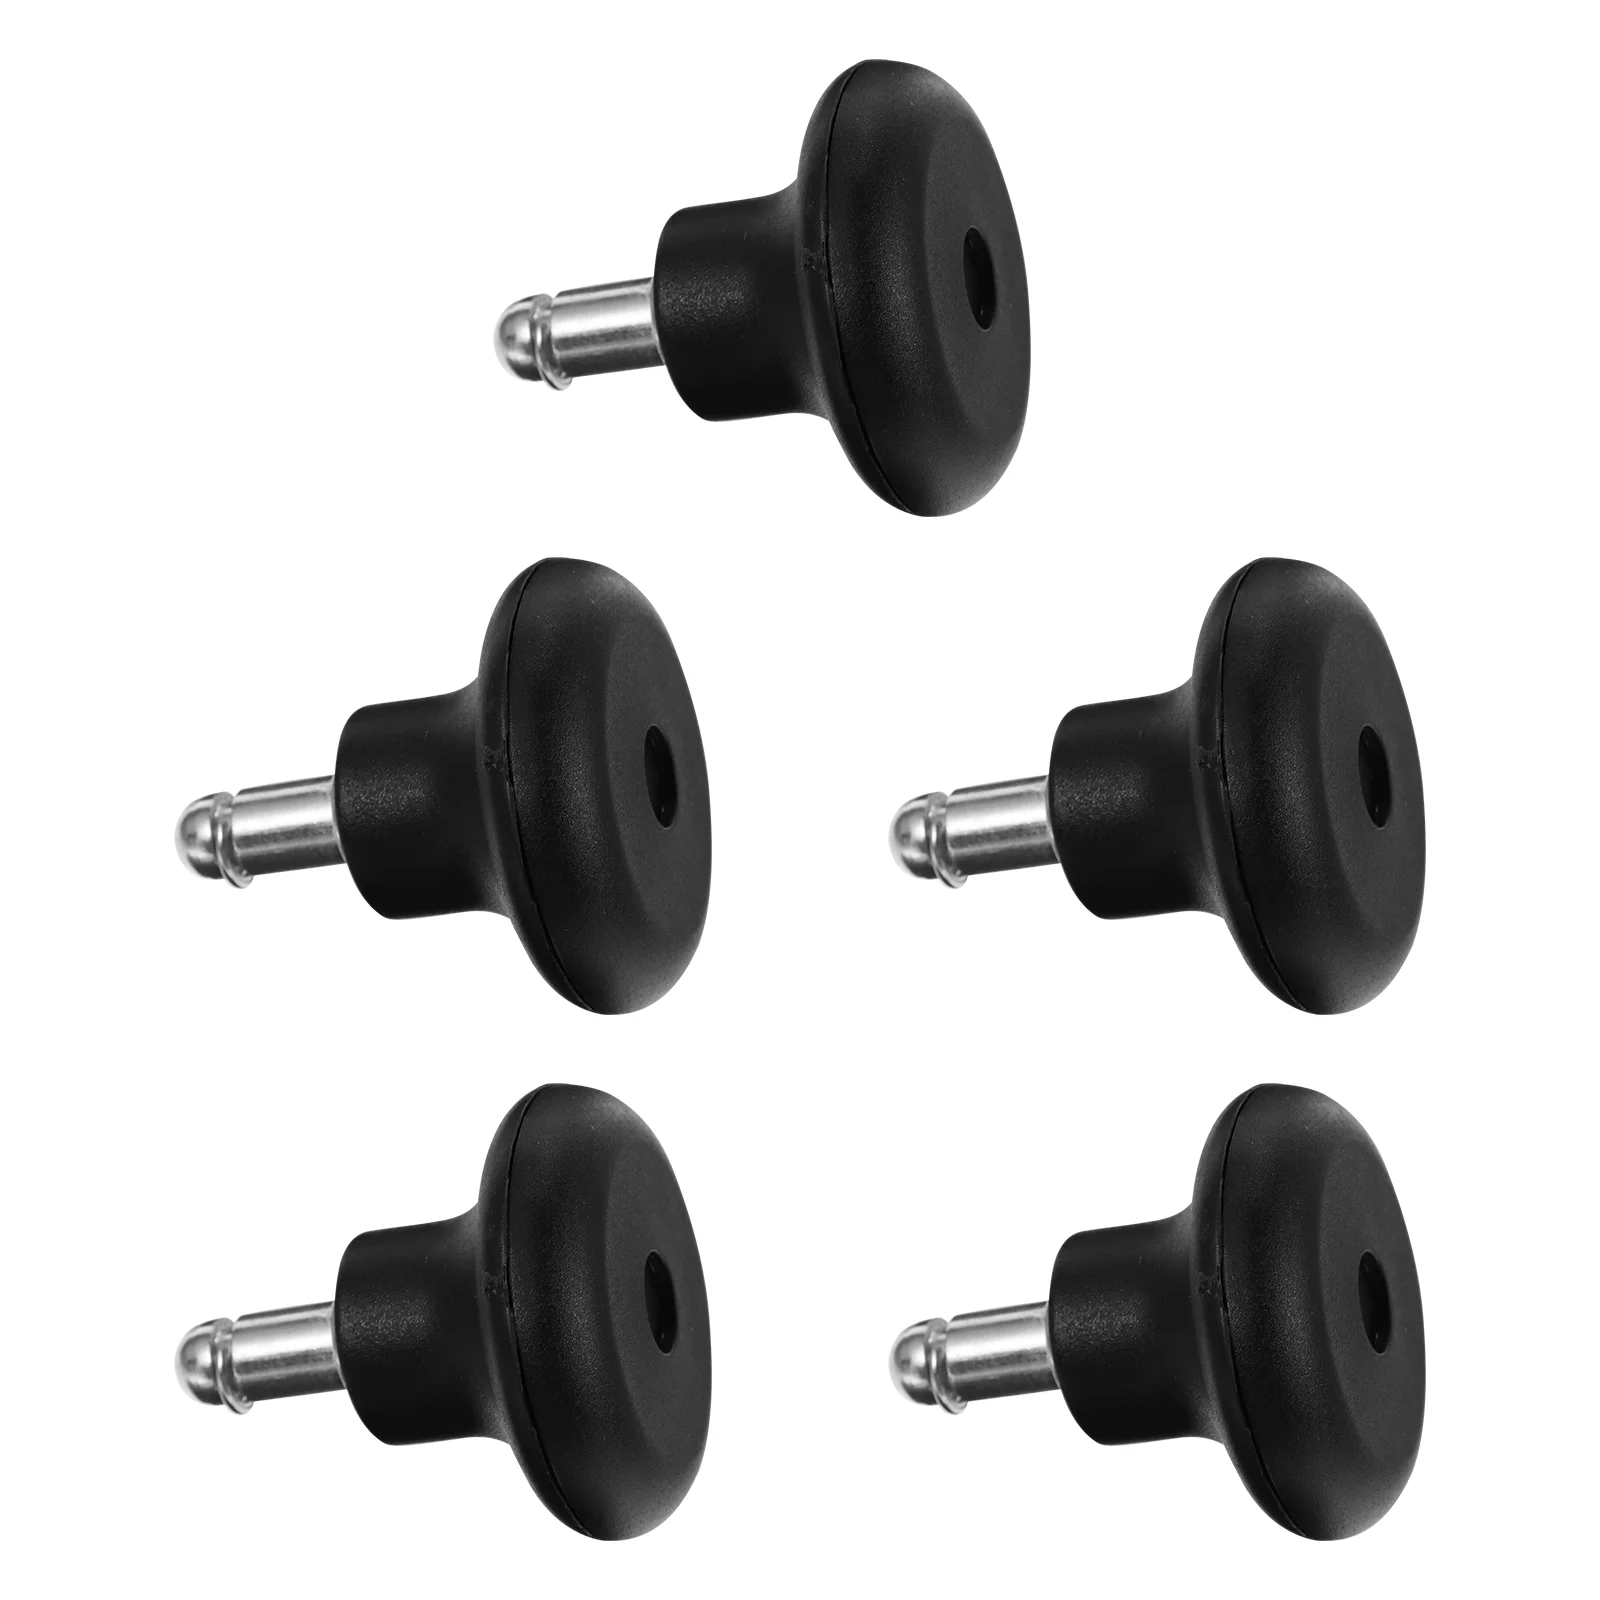 

5pcs Office Chair Bell Glides Replacement Chair Wheels Stopper Anti- Stool Swivel Caster Wheels to Fixed Stationary Castors for